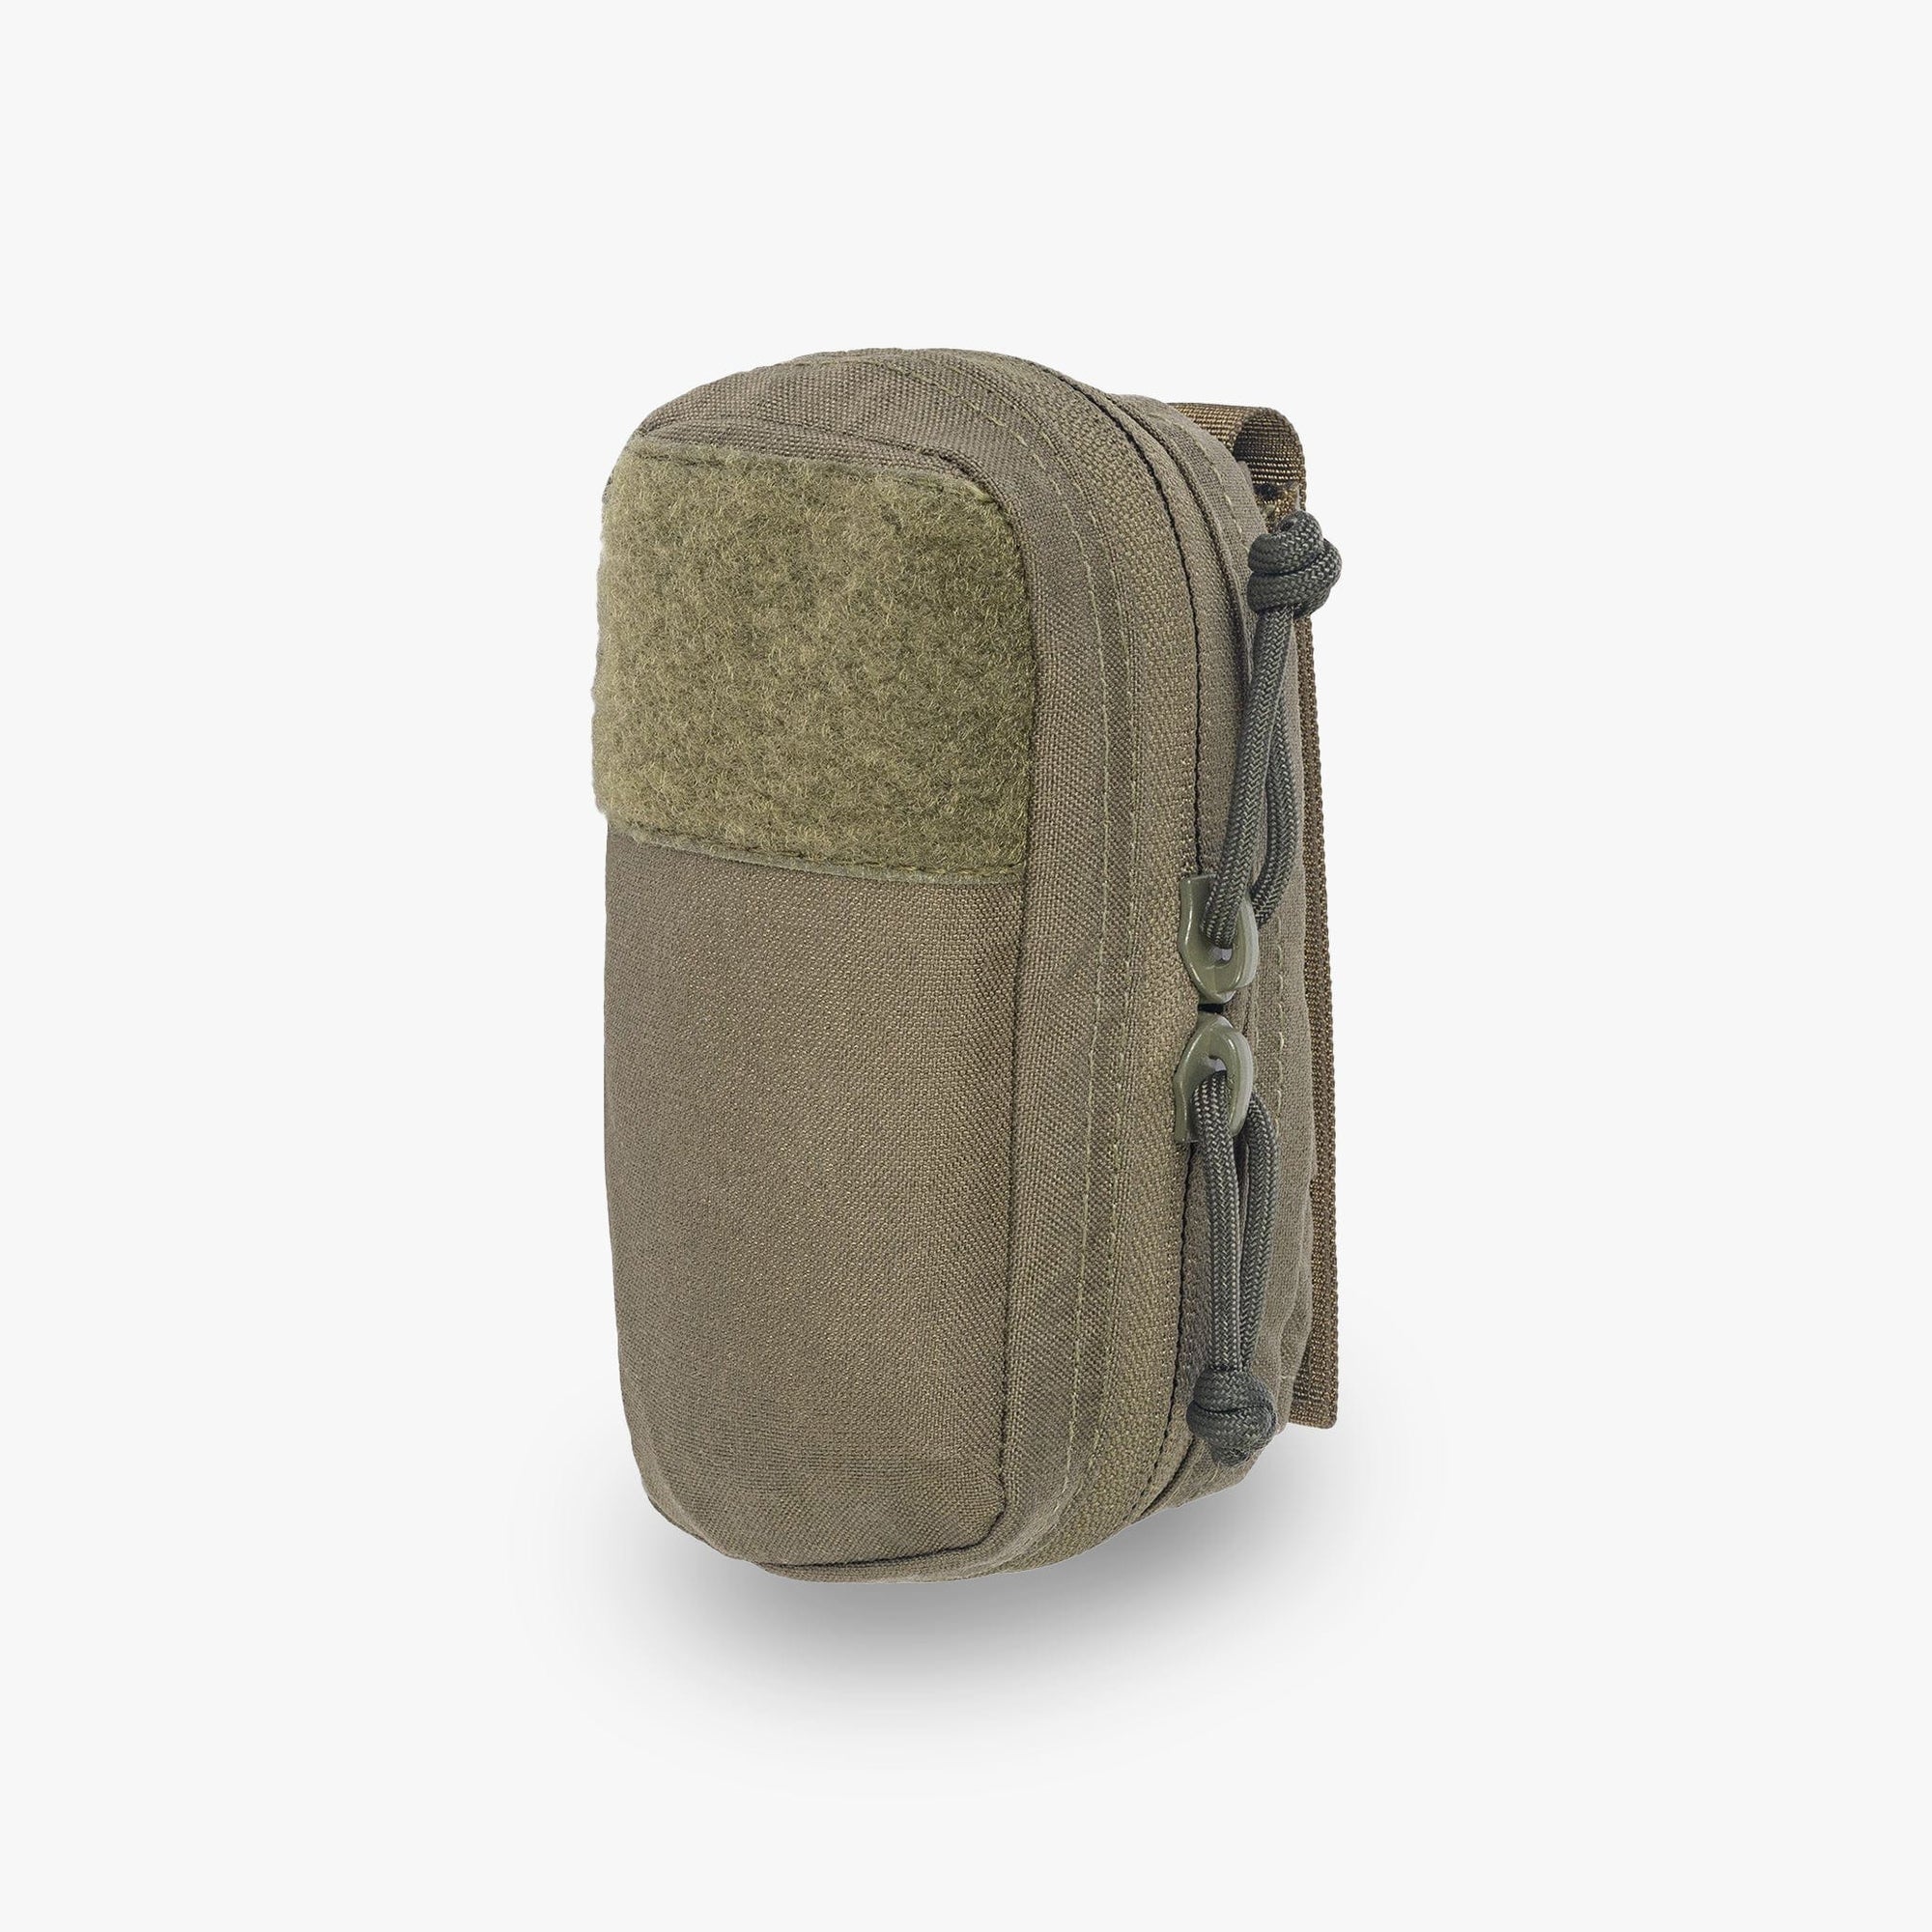 Perfect tactical medical gear for your EDC system or to use for plate carrier accessories. This MFAK mini first aid kit is available in ranger green. 